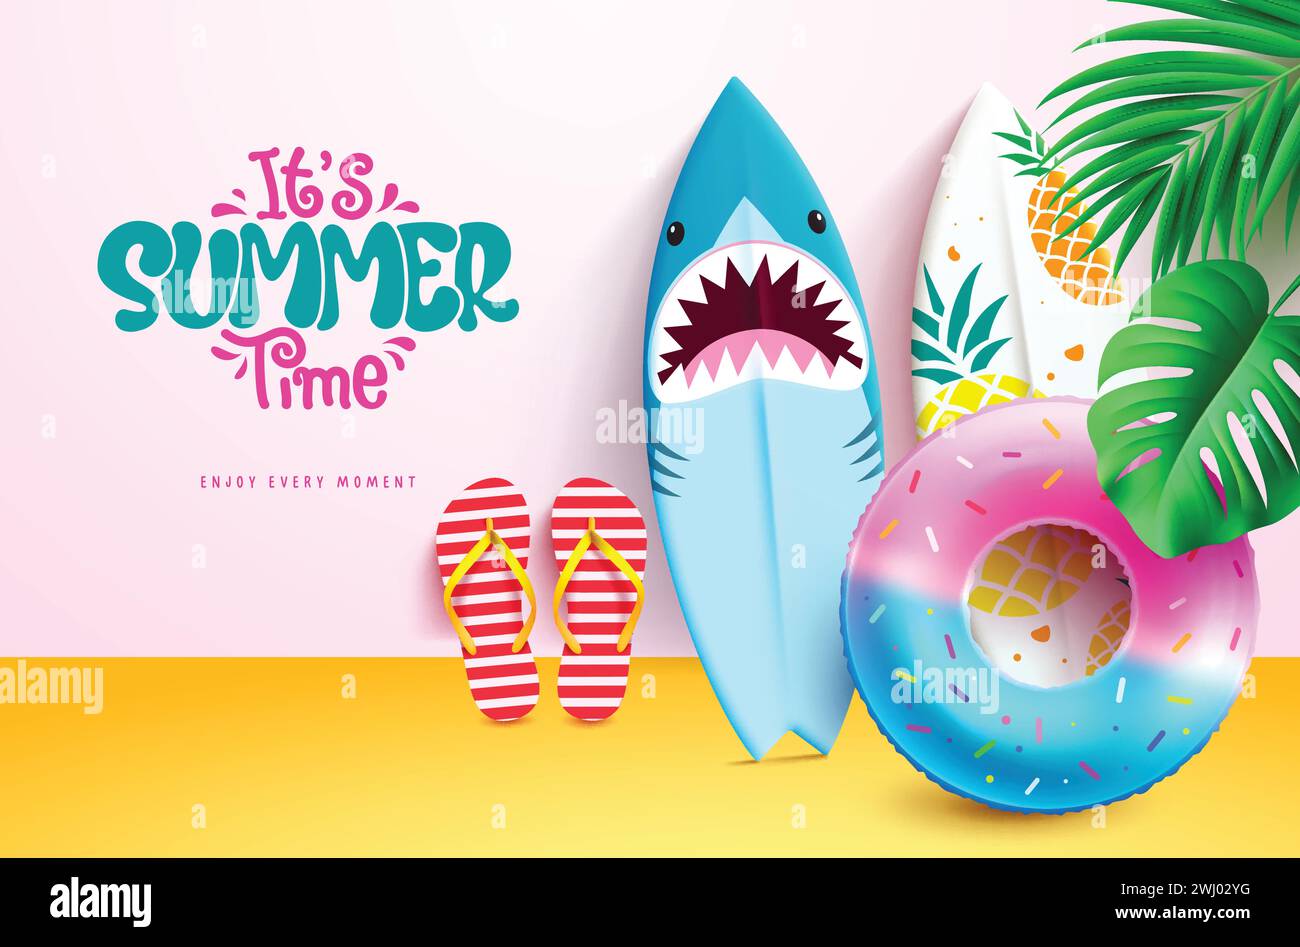 Summer time greeting text vector design. It's summer time text with floaters, shark and pineapple surfboard beach decoration elements for tropical Stock Vector